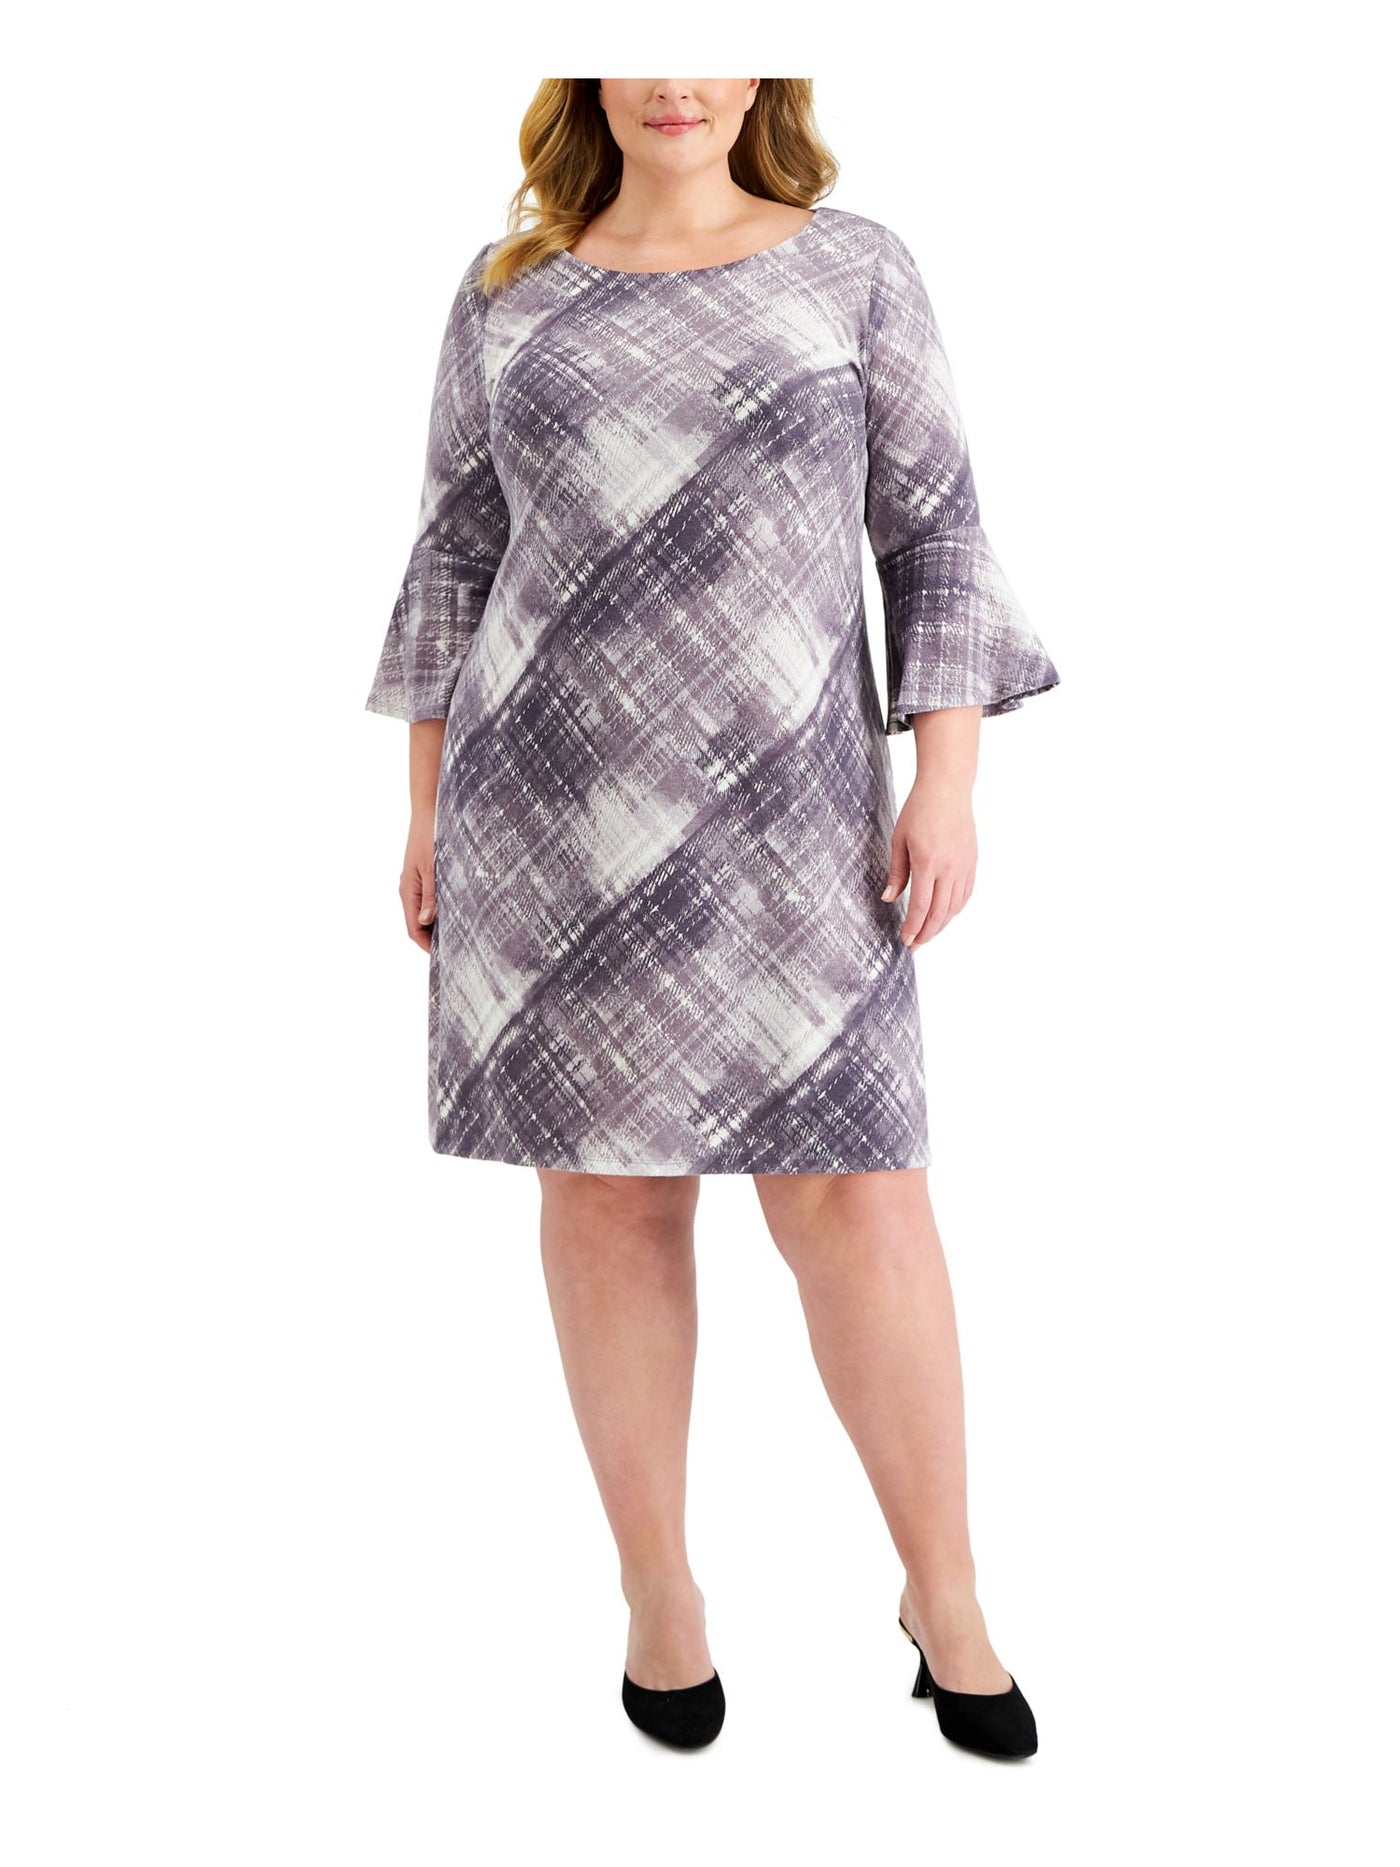 CONNECTED APPAREL Womens Purple Stretch Plaid Bell Sleeve Round Neck Above The Knee Wear To Work Fit + Flare Dress Plus 20W